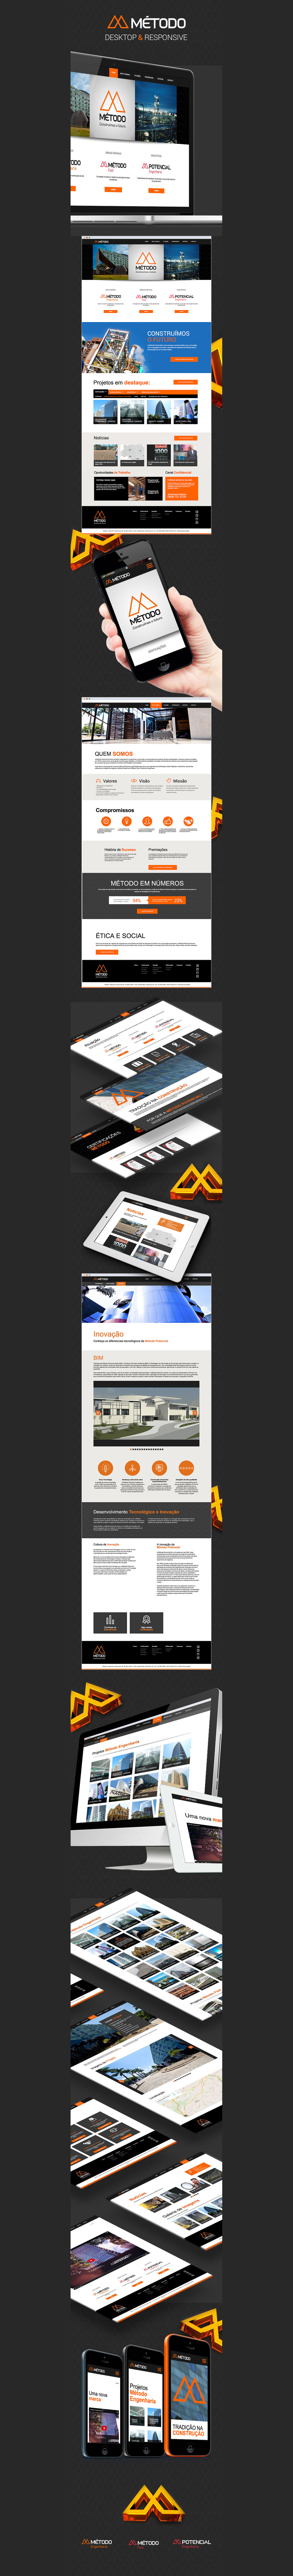 metodo 3d brand yellow black real estate Responsive Mobile first